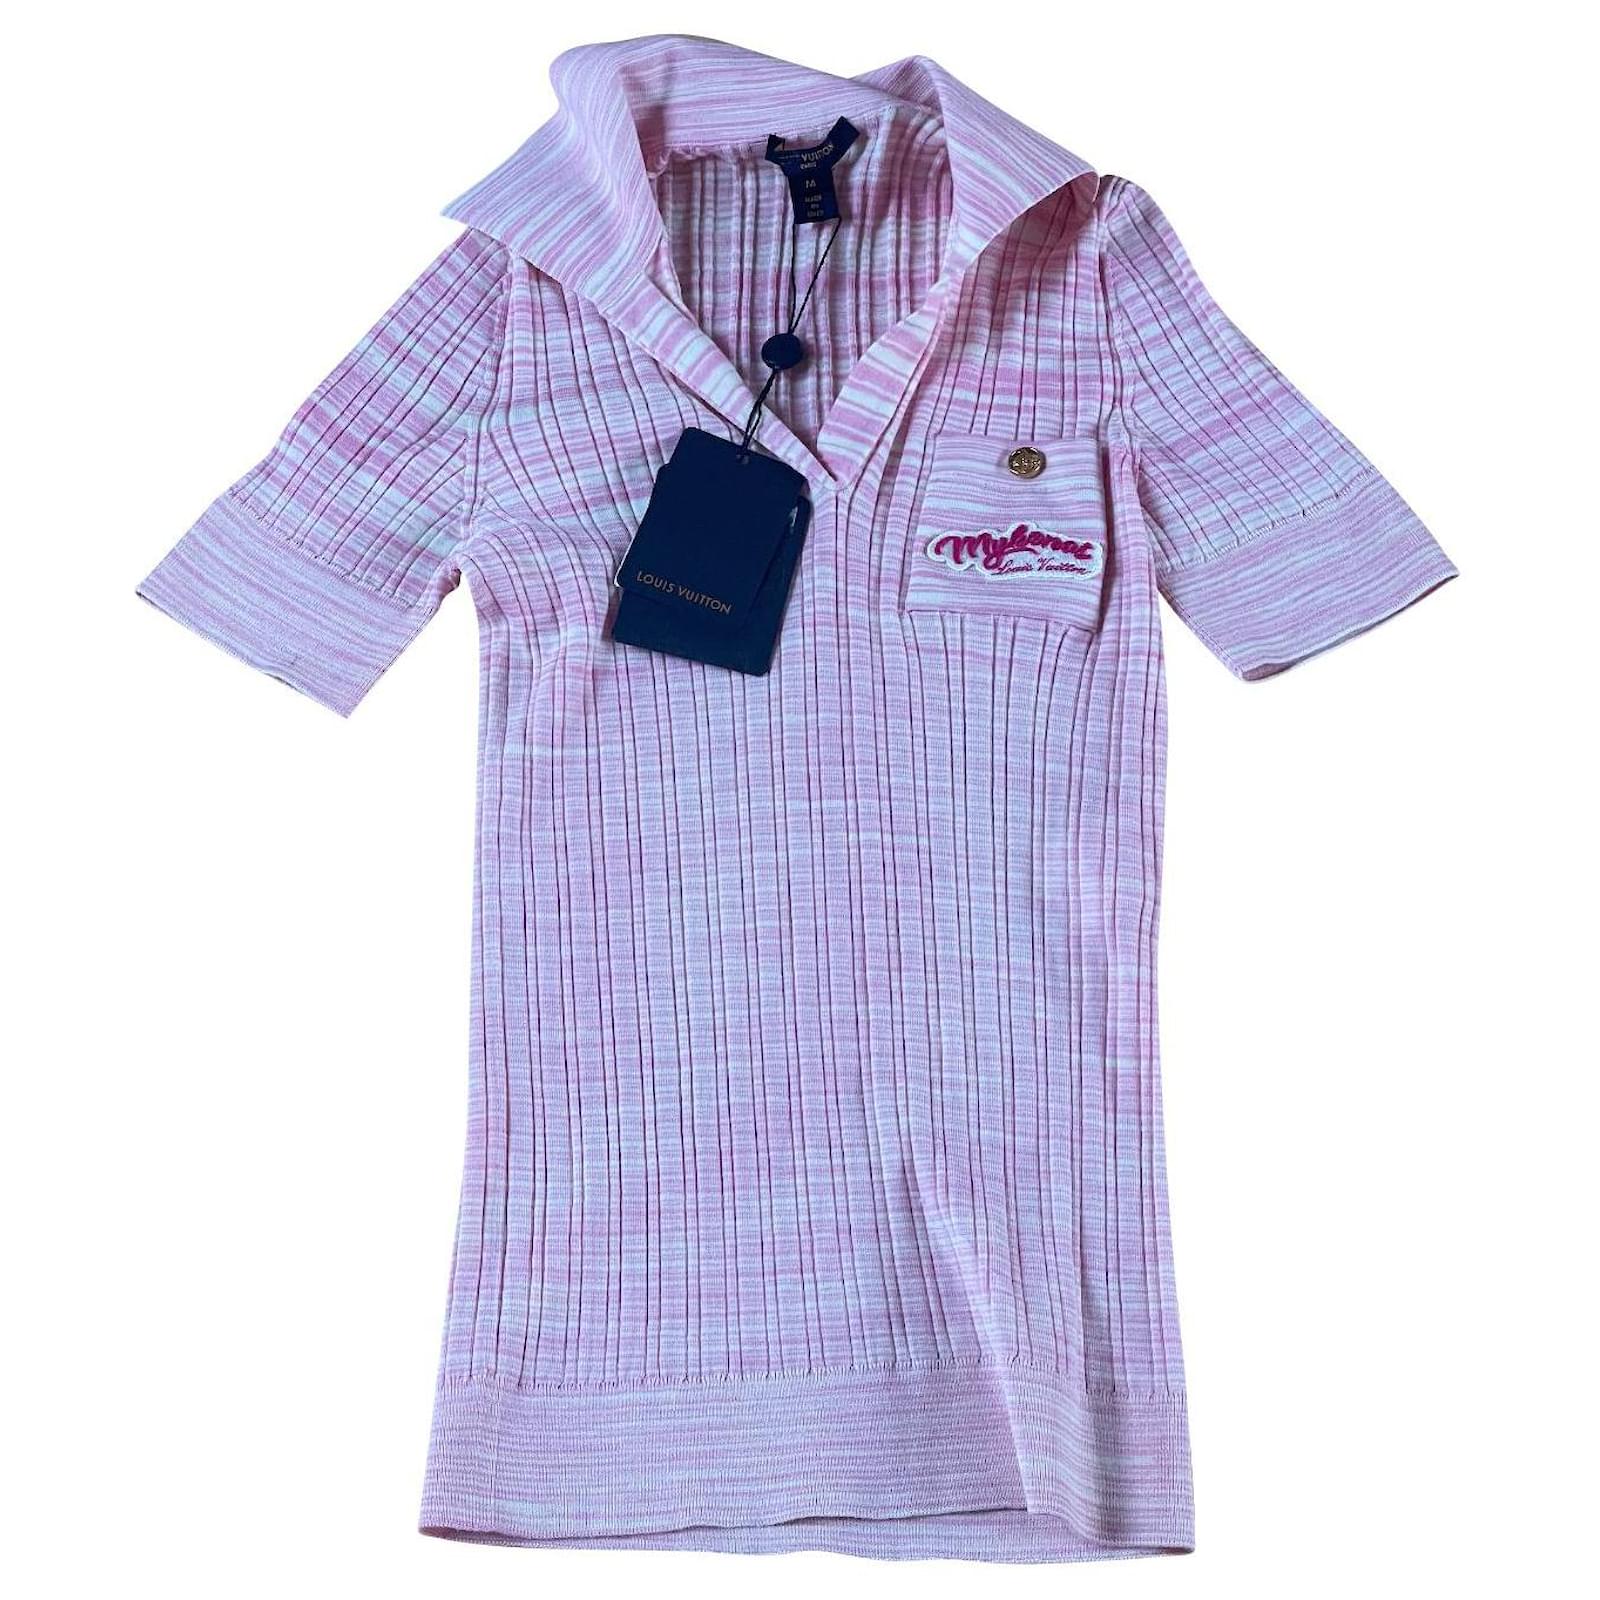 pink and white louis vuitton shirt